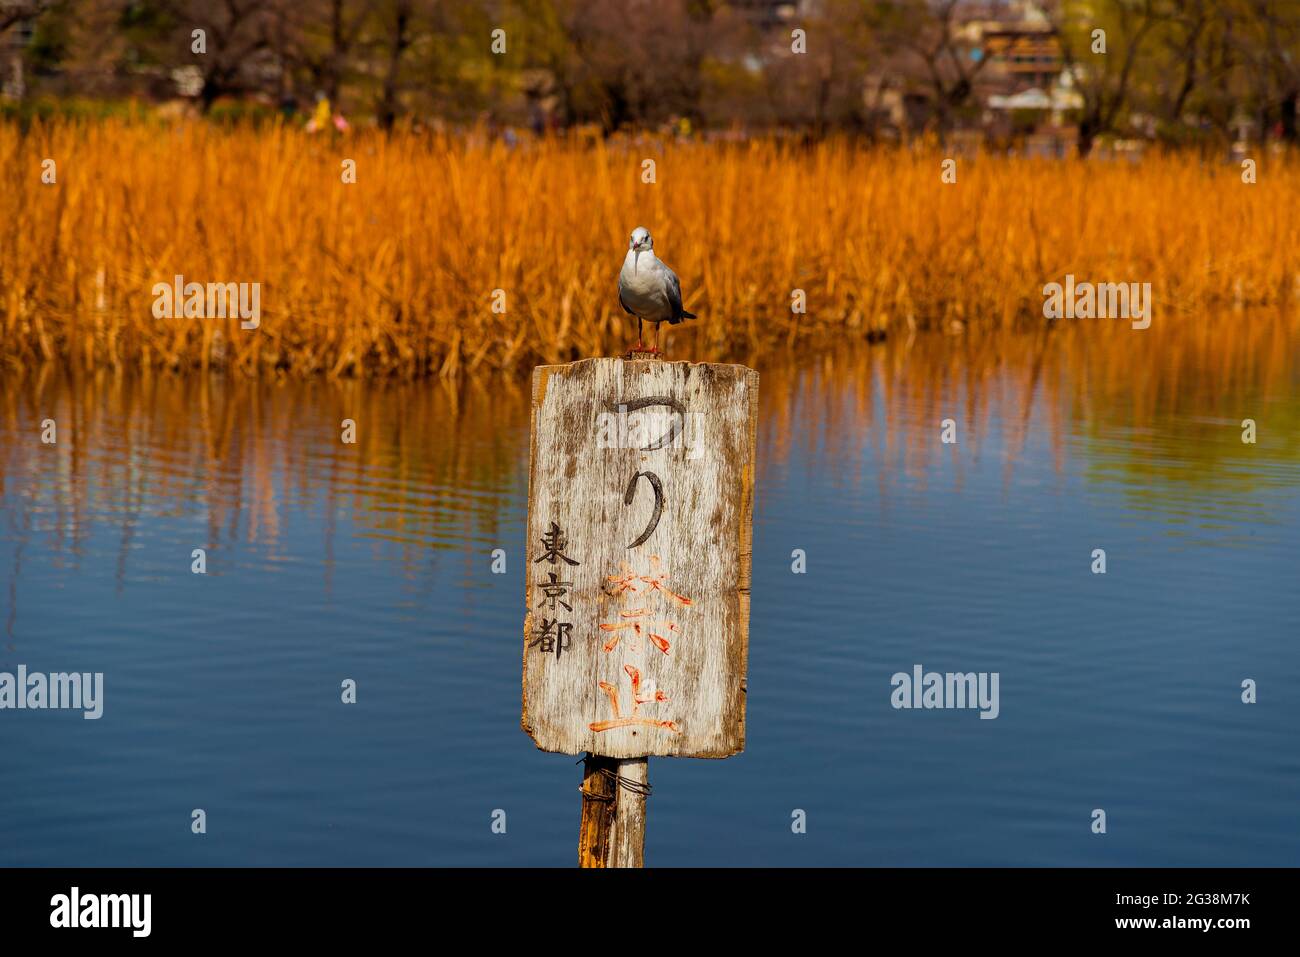 'No Fishing' sign with Japanese ideograms in Shinomazu Pond, with seagull Stock Photo